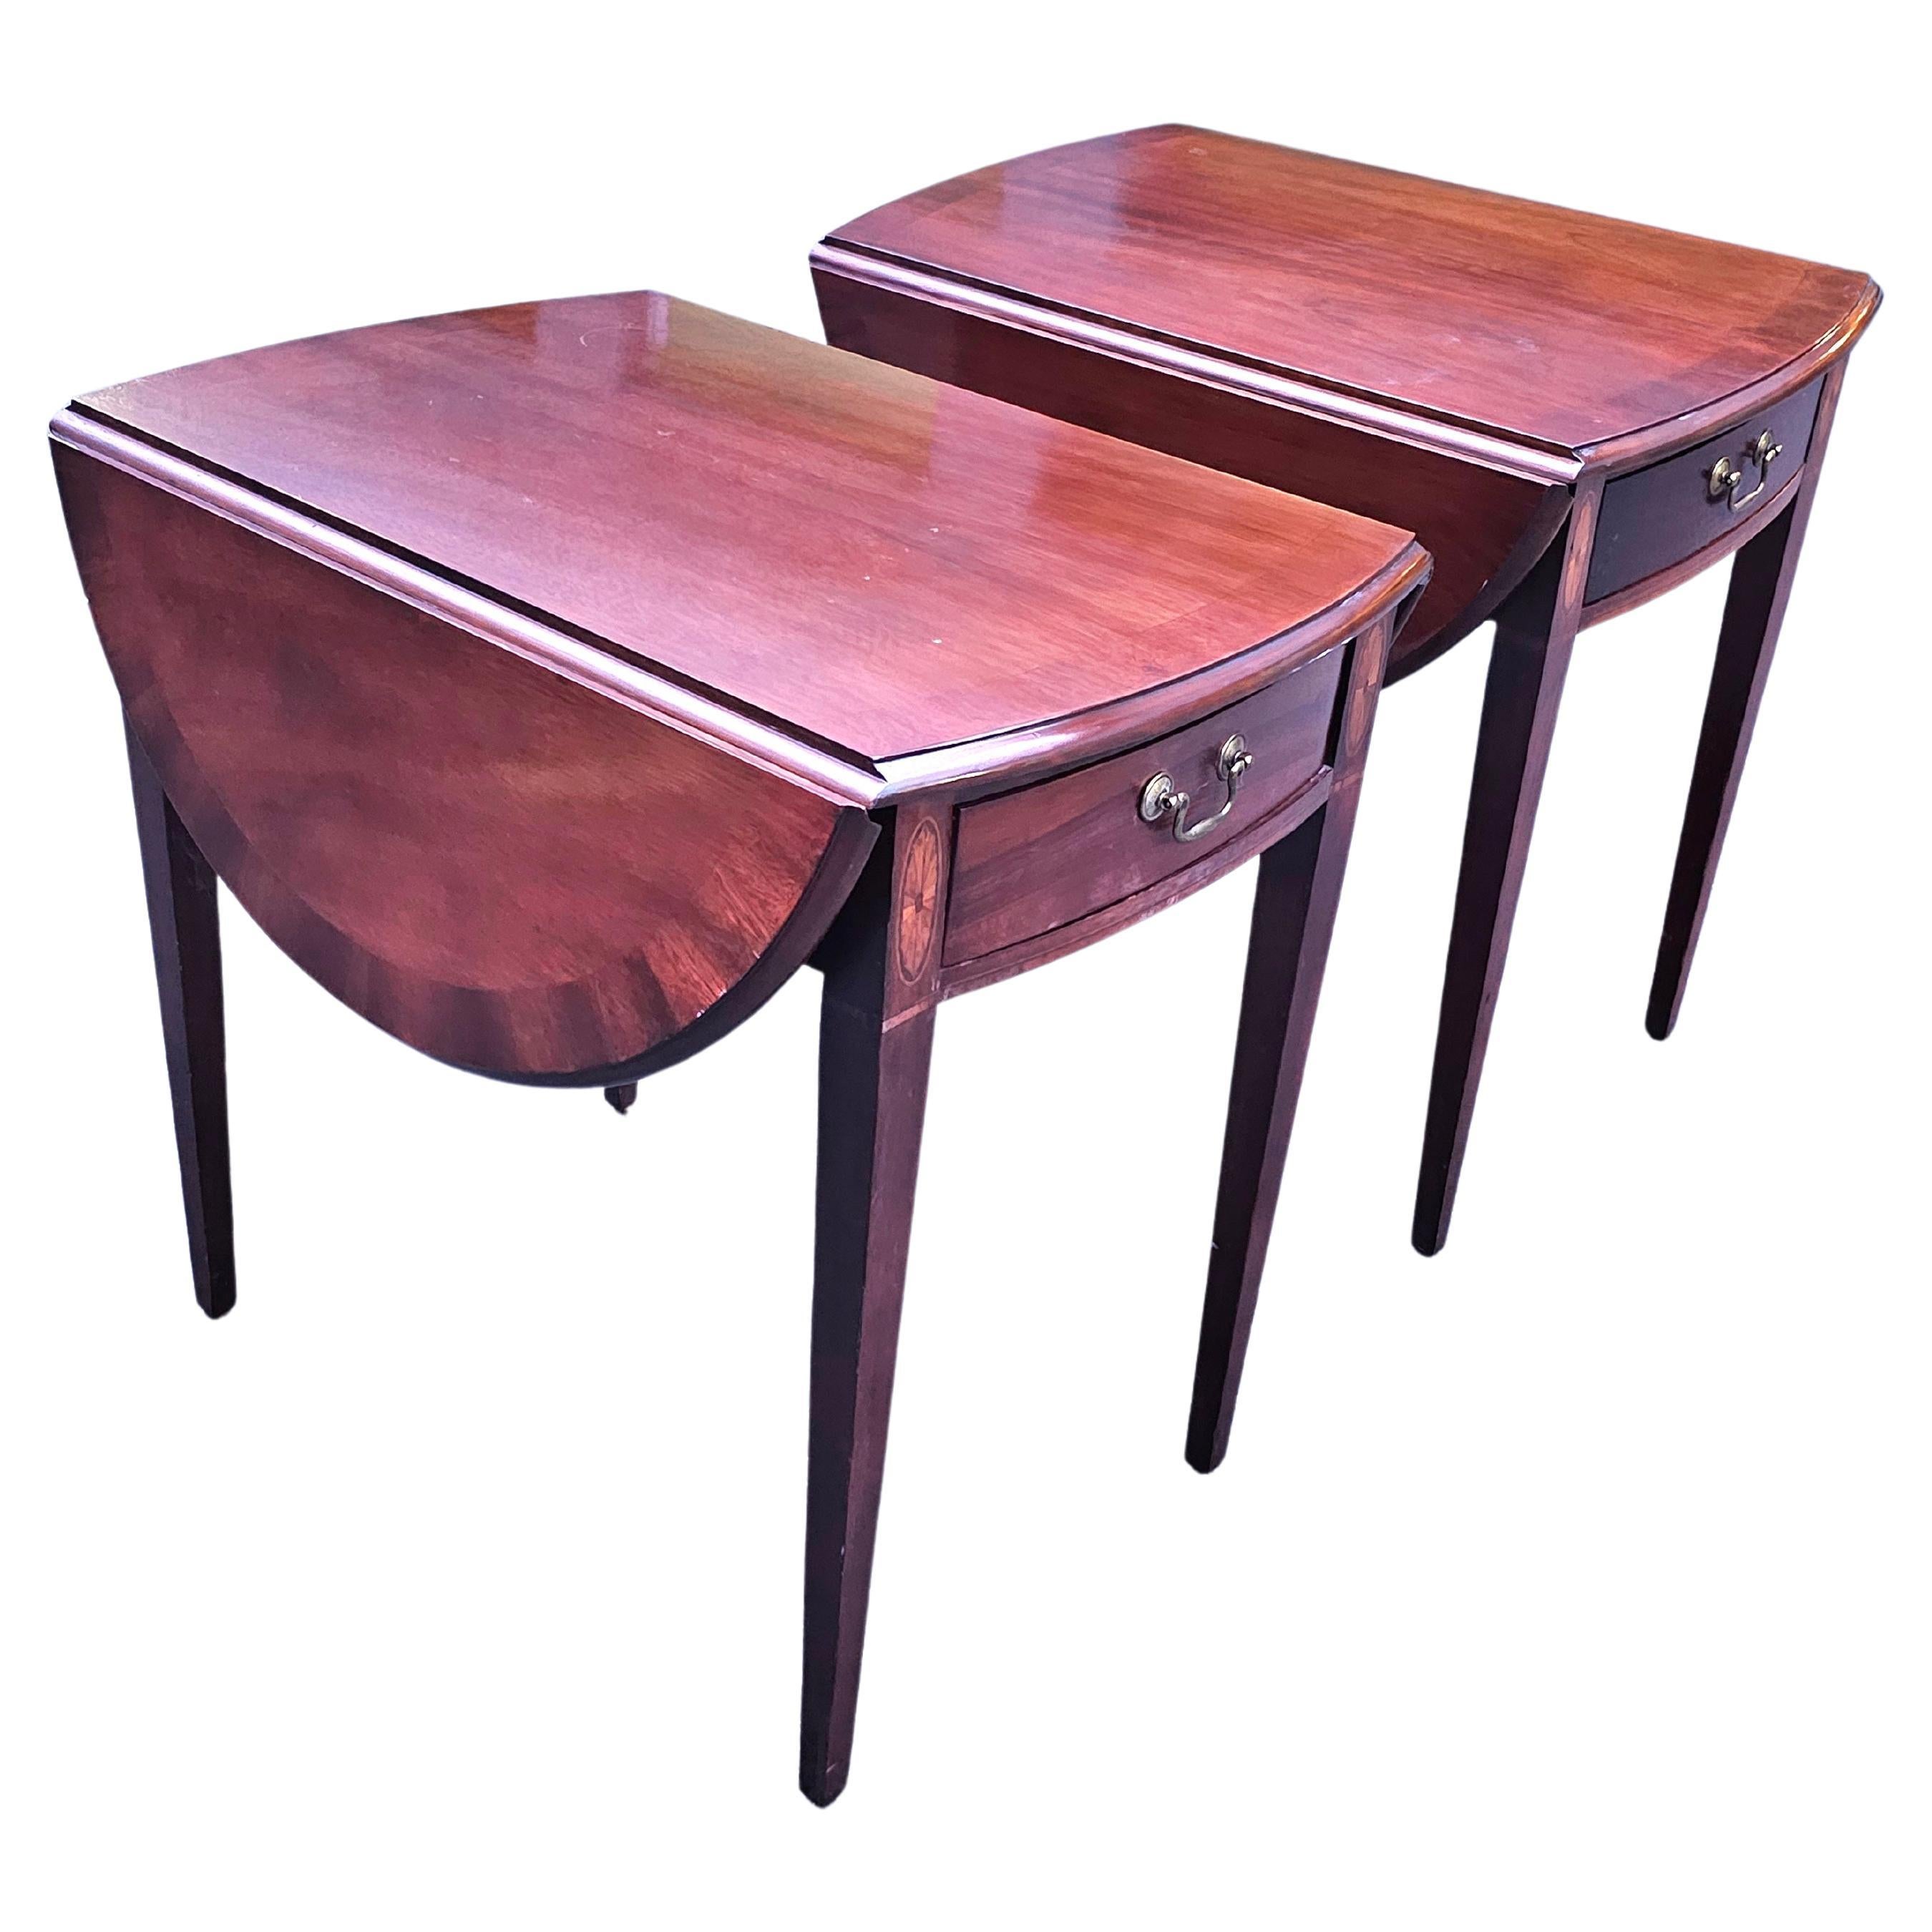 Pair of Magogany Banded and Satinwood Inlaid Pembroke Drop-Leaf Side Tables